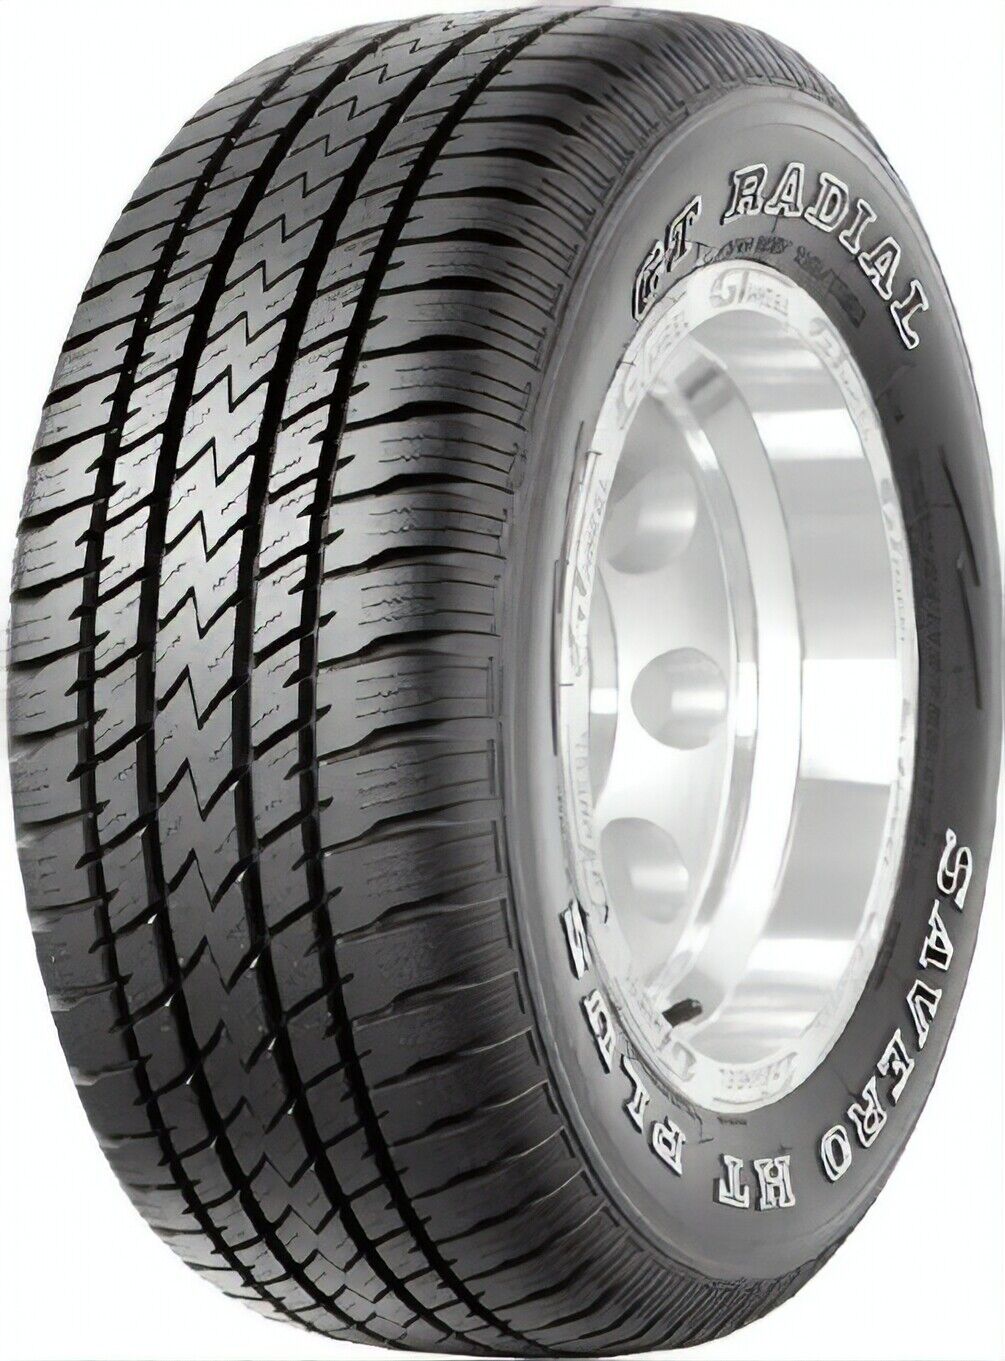 GT Radial Savero HT-S 215/70R16 100H BSW (2 Tires)